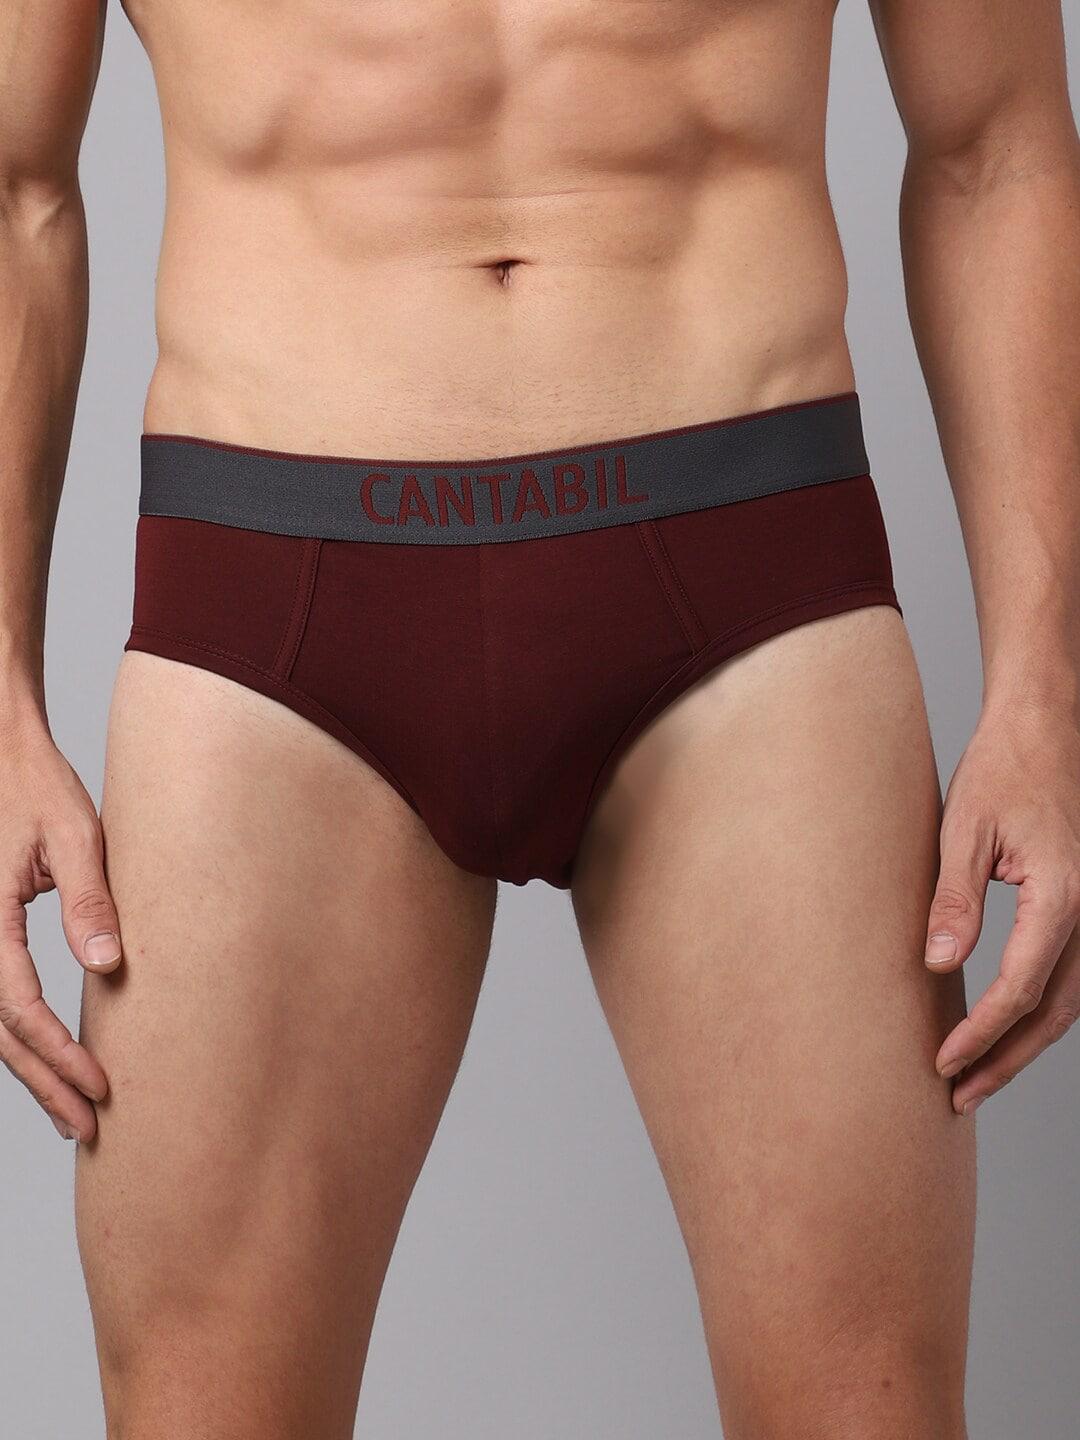 cantabil men set of 2 maroon solid basic cotton briefs